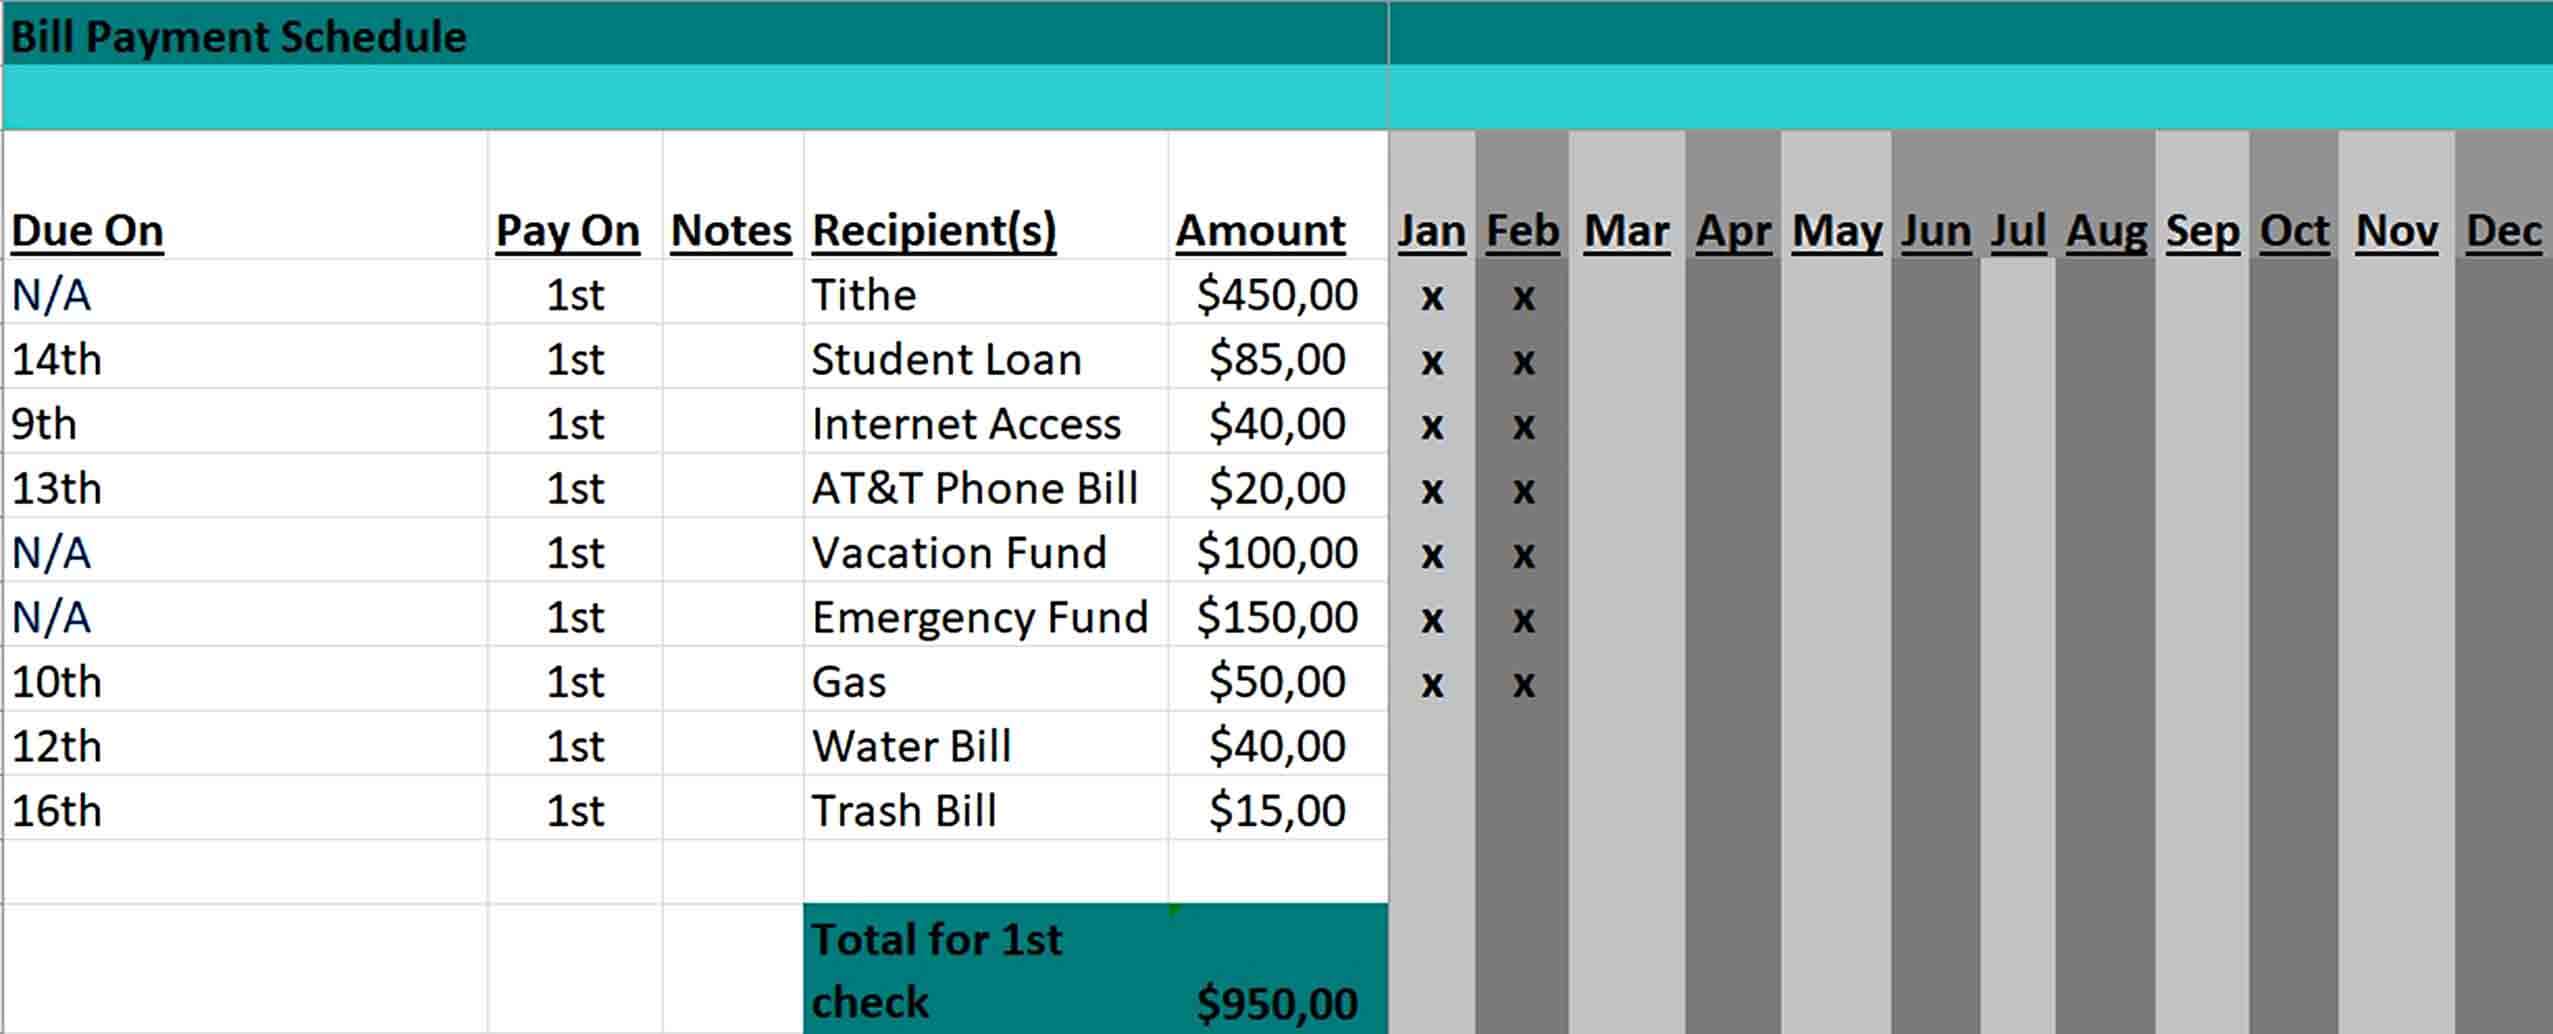 Bill Payment Schedule Template Excel Format